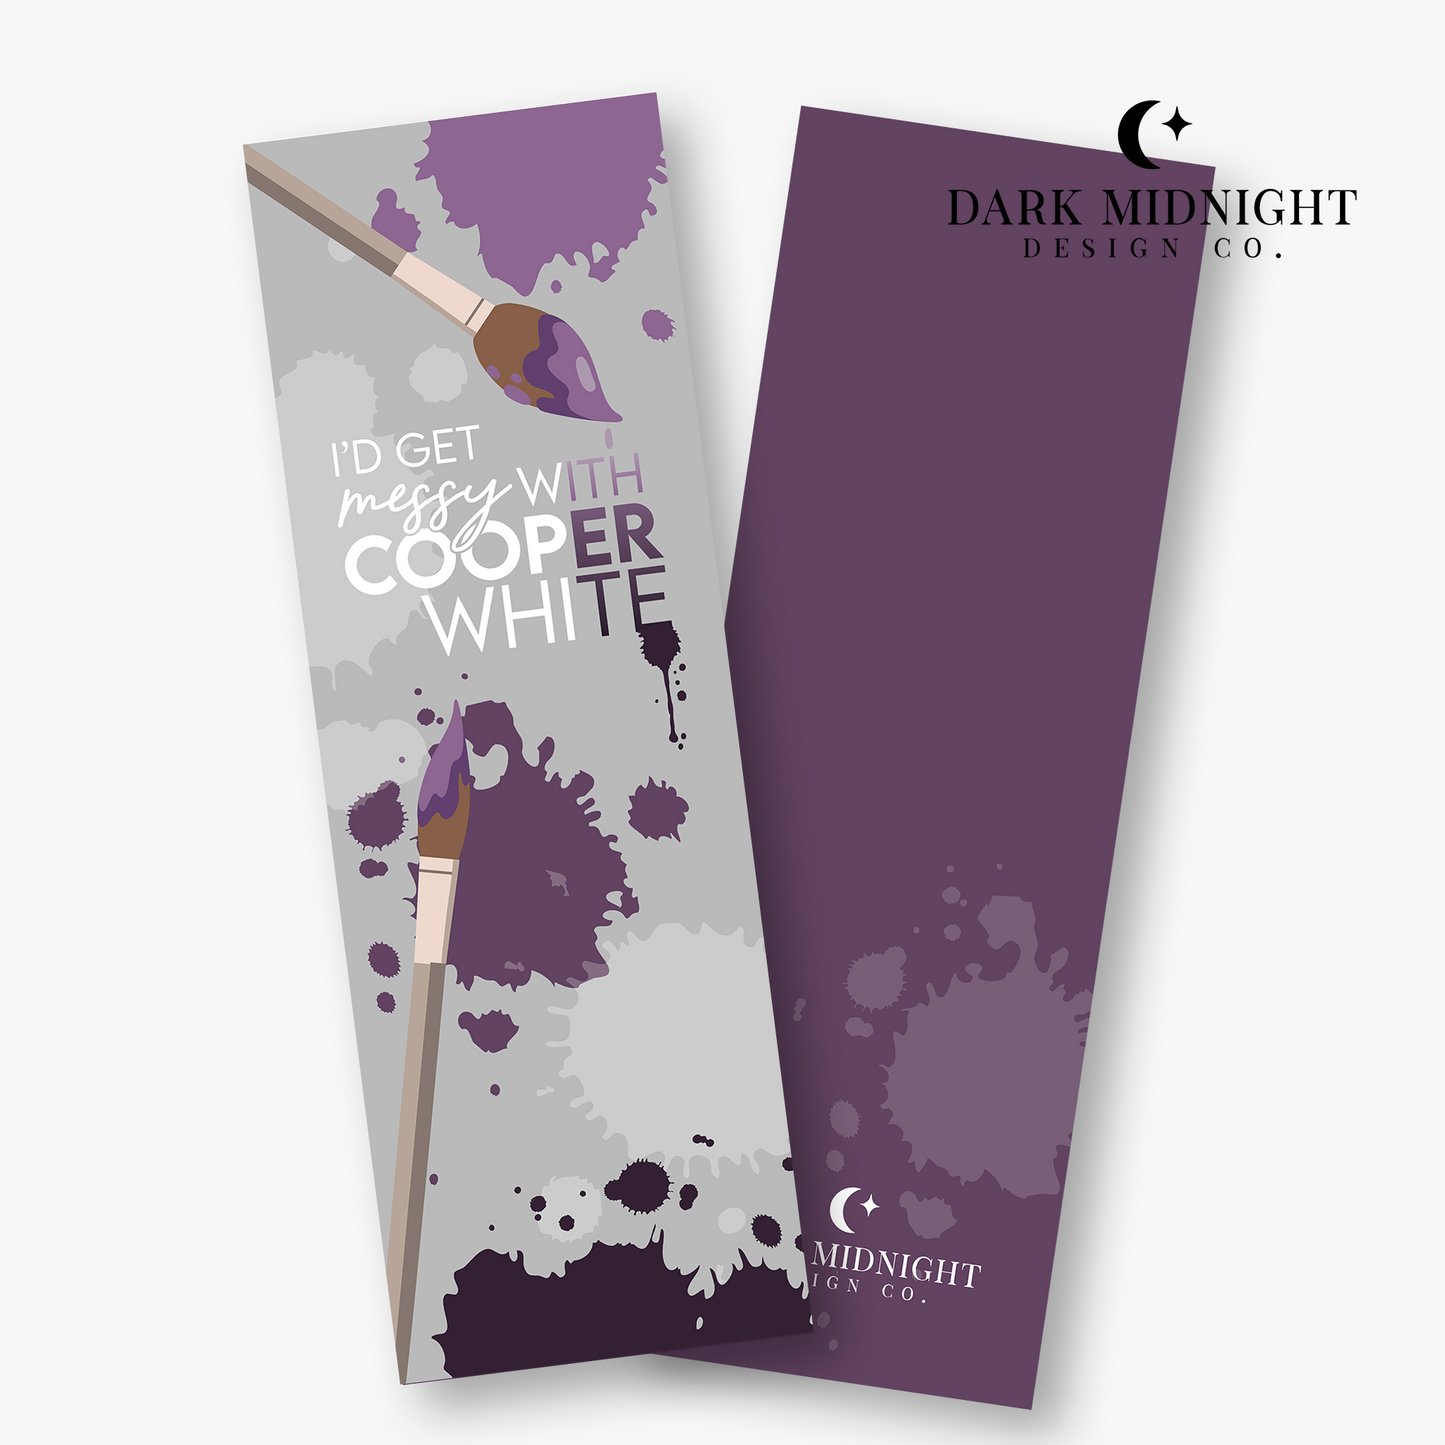 I'd Get Messy with Cooper White Bookmark - Officially Licensed Greatest Love Series